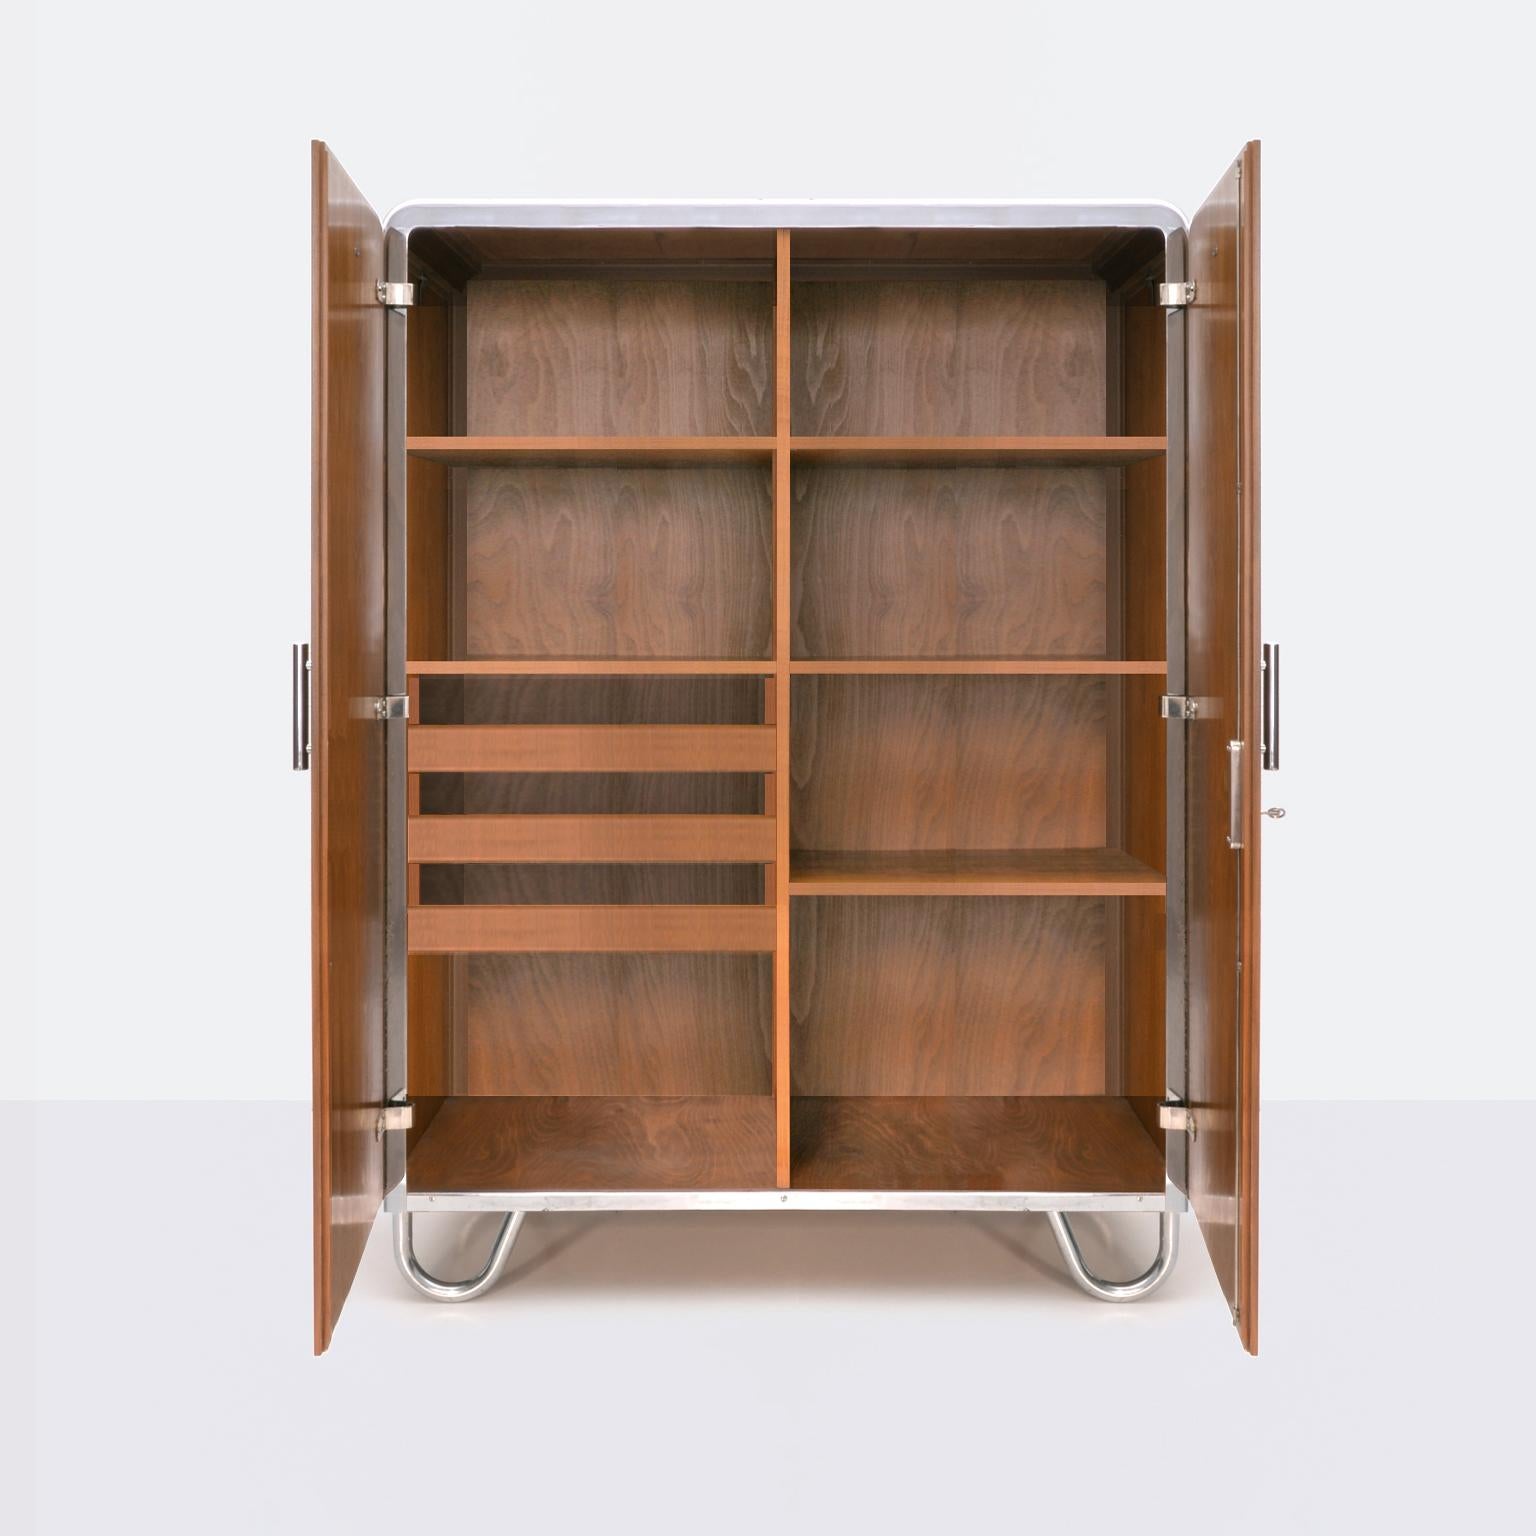 Art Deco Modernist Cabinet Made Of Chrome Plated Metal And Walnut Veneer, c. 1930 For Sale